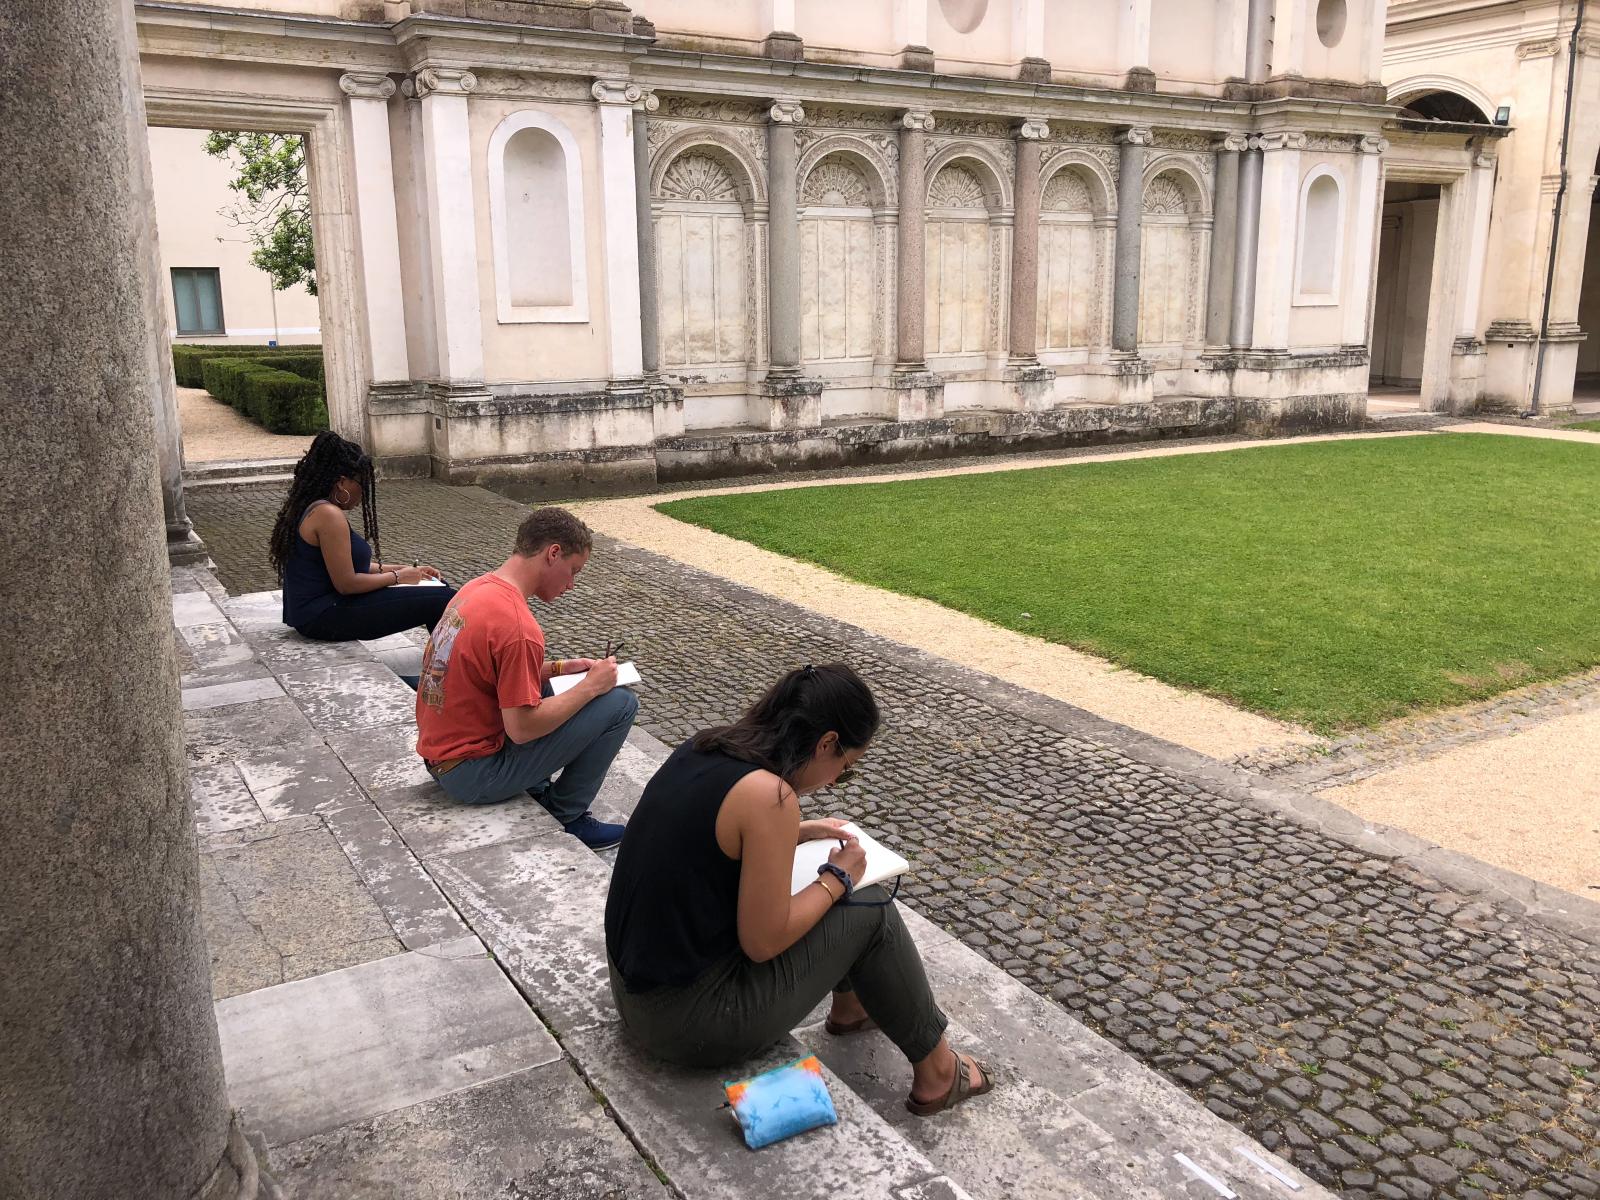 Students sketching on the steps of Villa Giulia in Rome, Italy